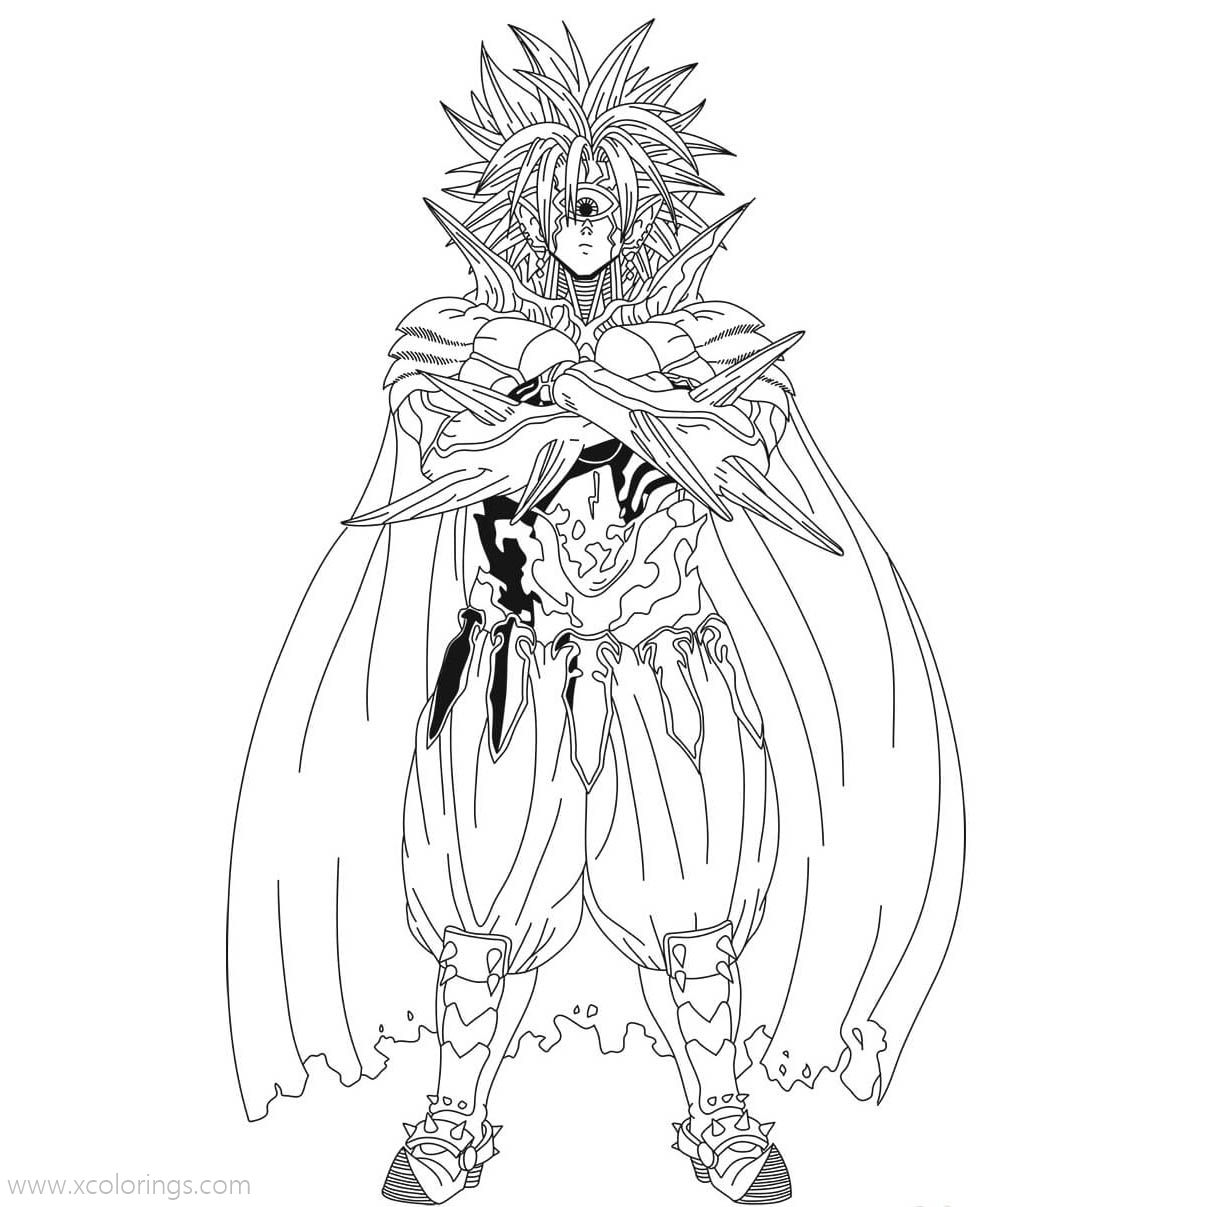 One Punch Man Boros Coloring Pages - XColorings.com